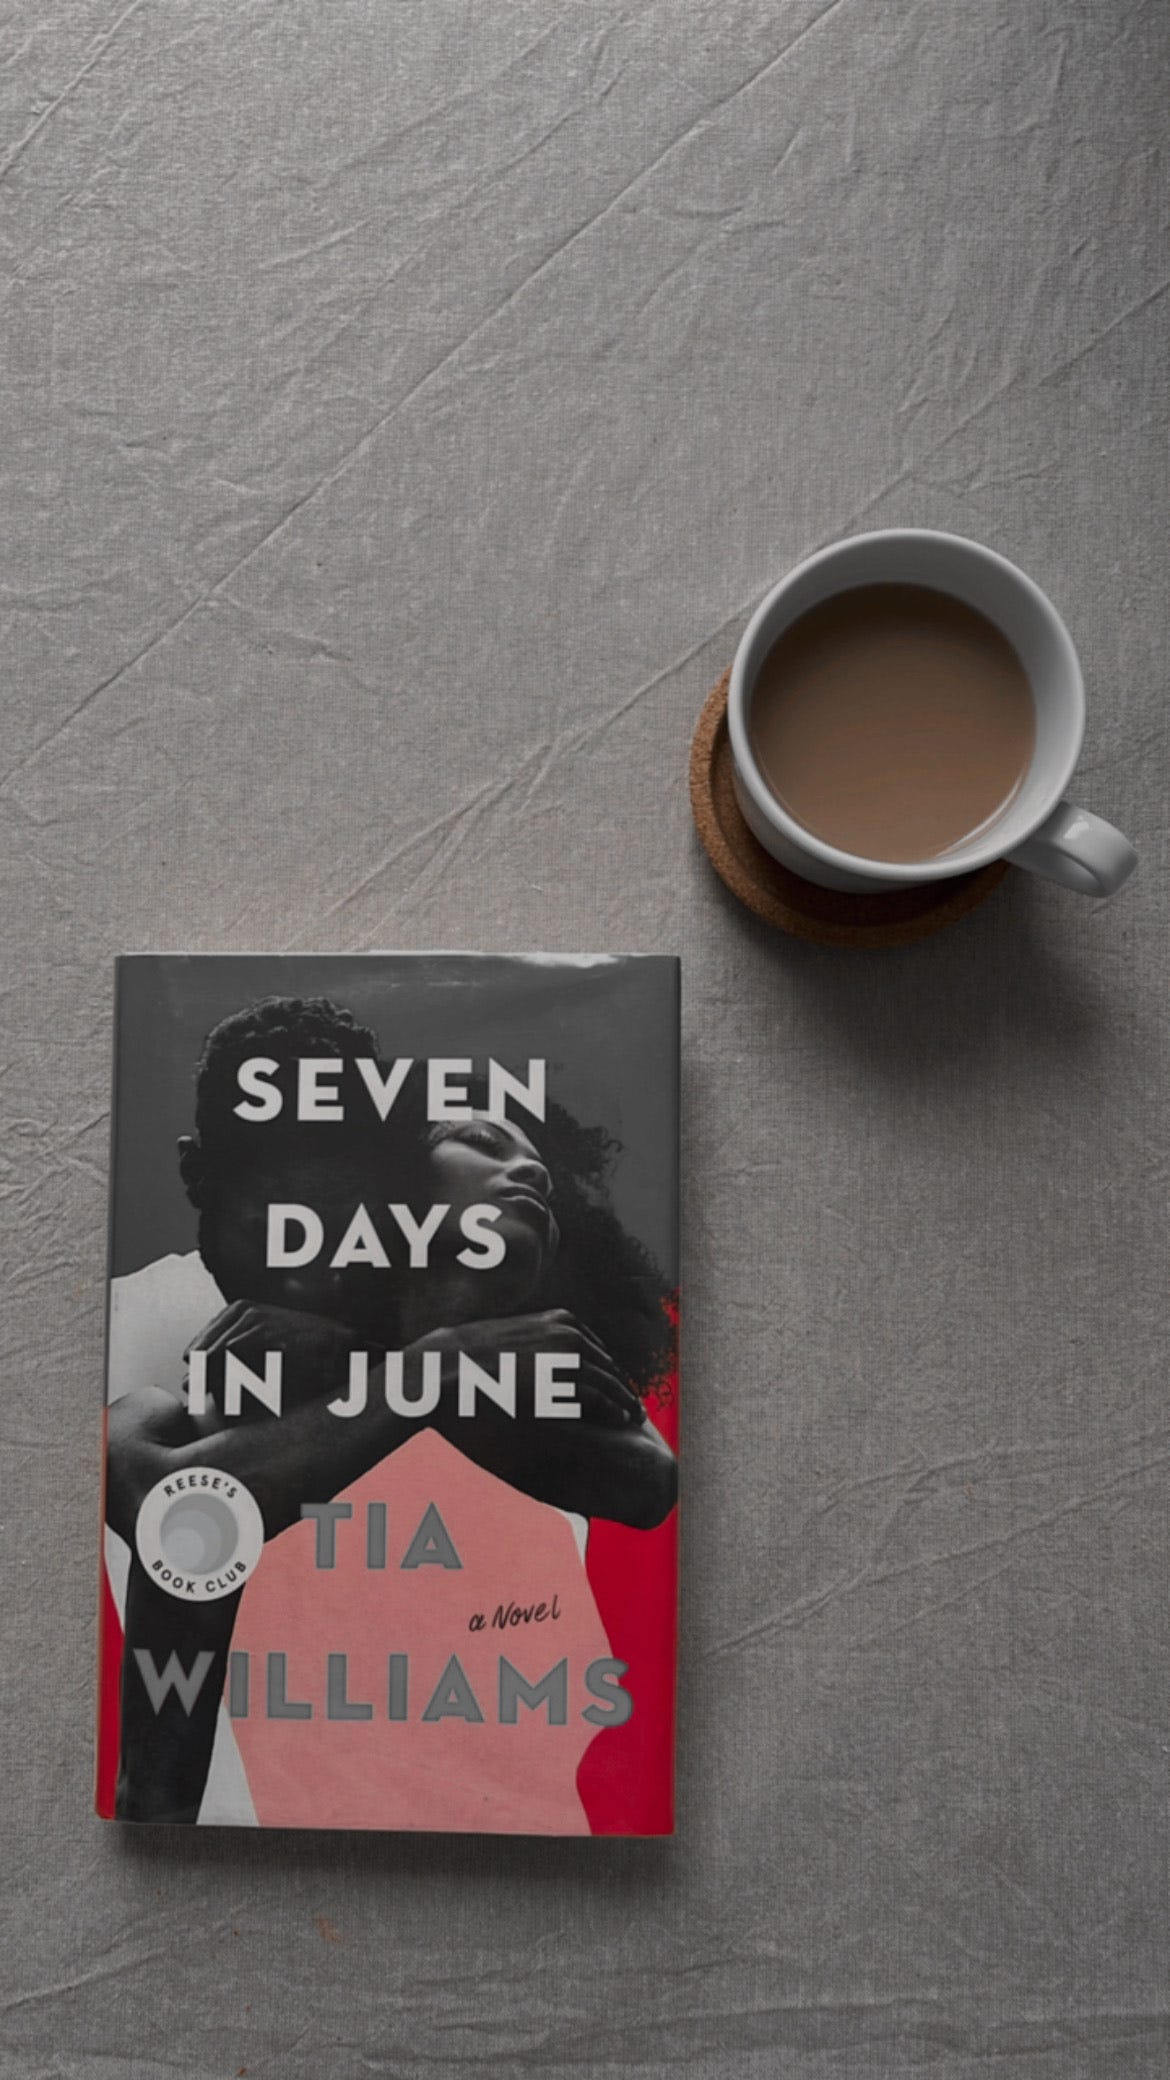 Book review : Seven days in June by Tia Williams